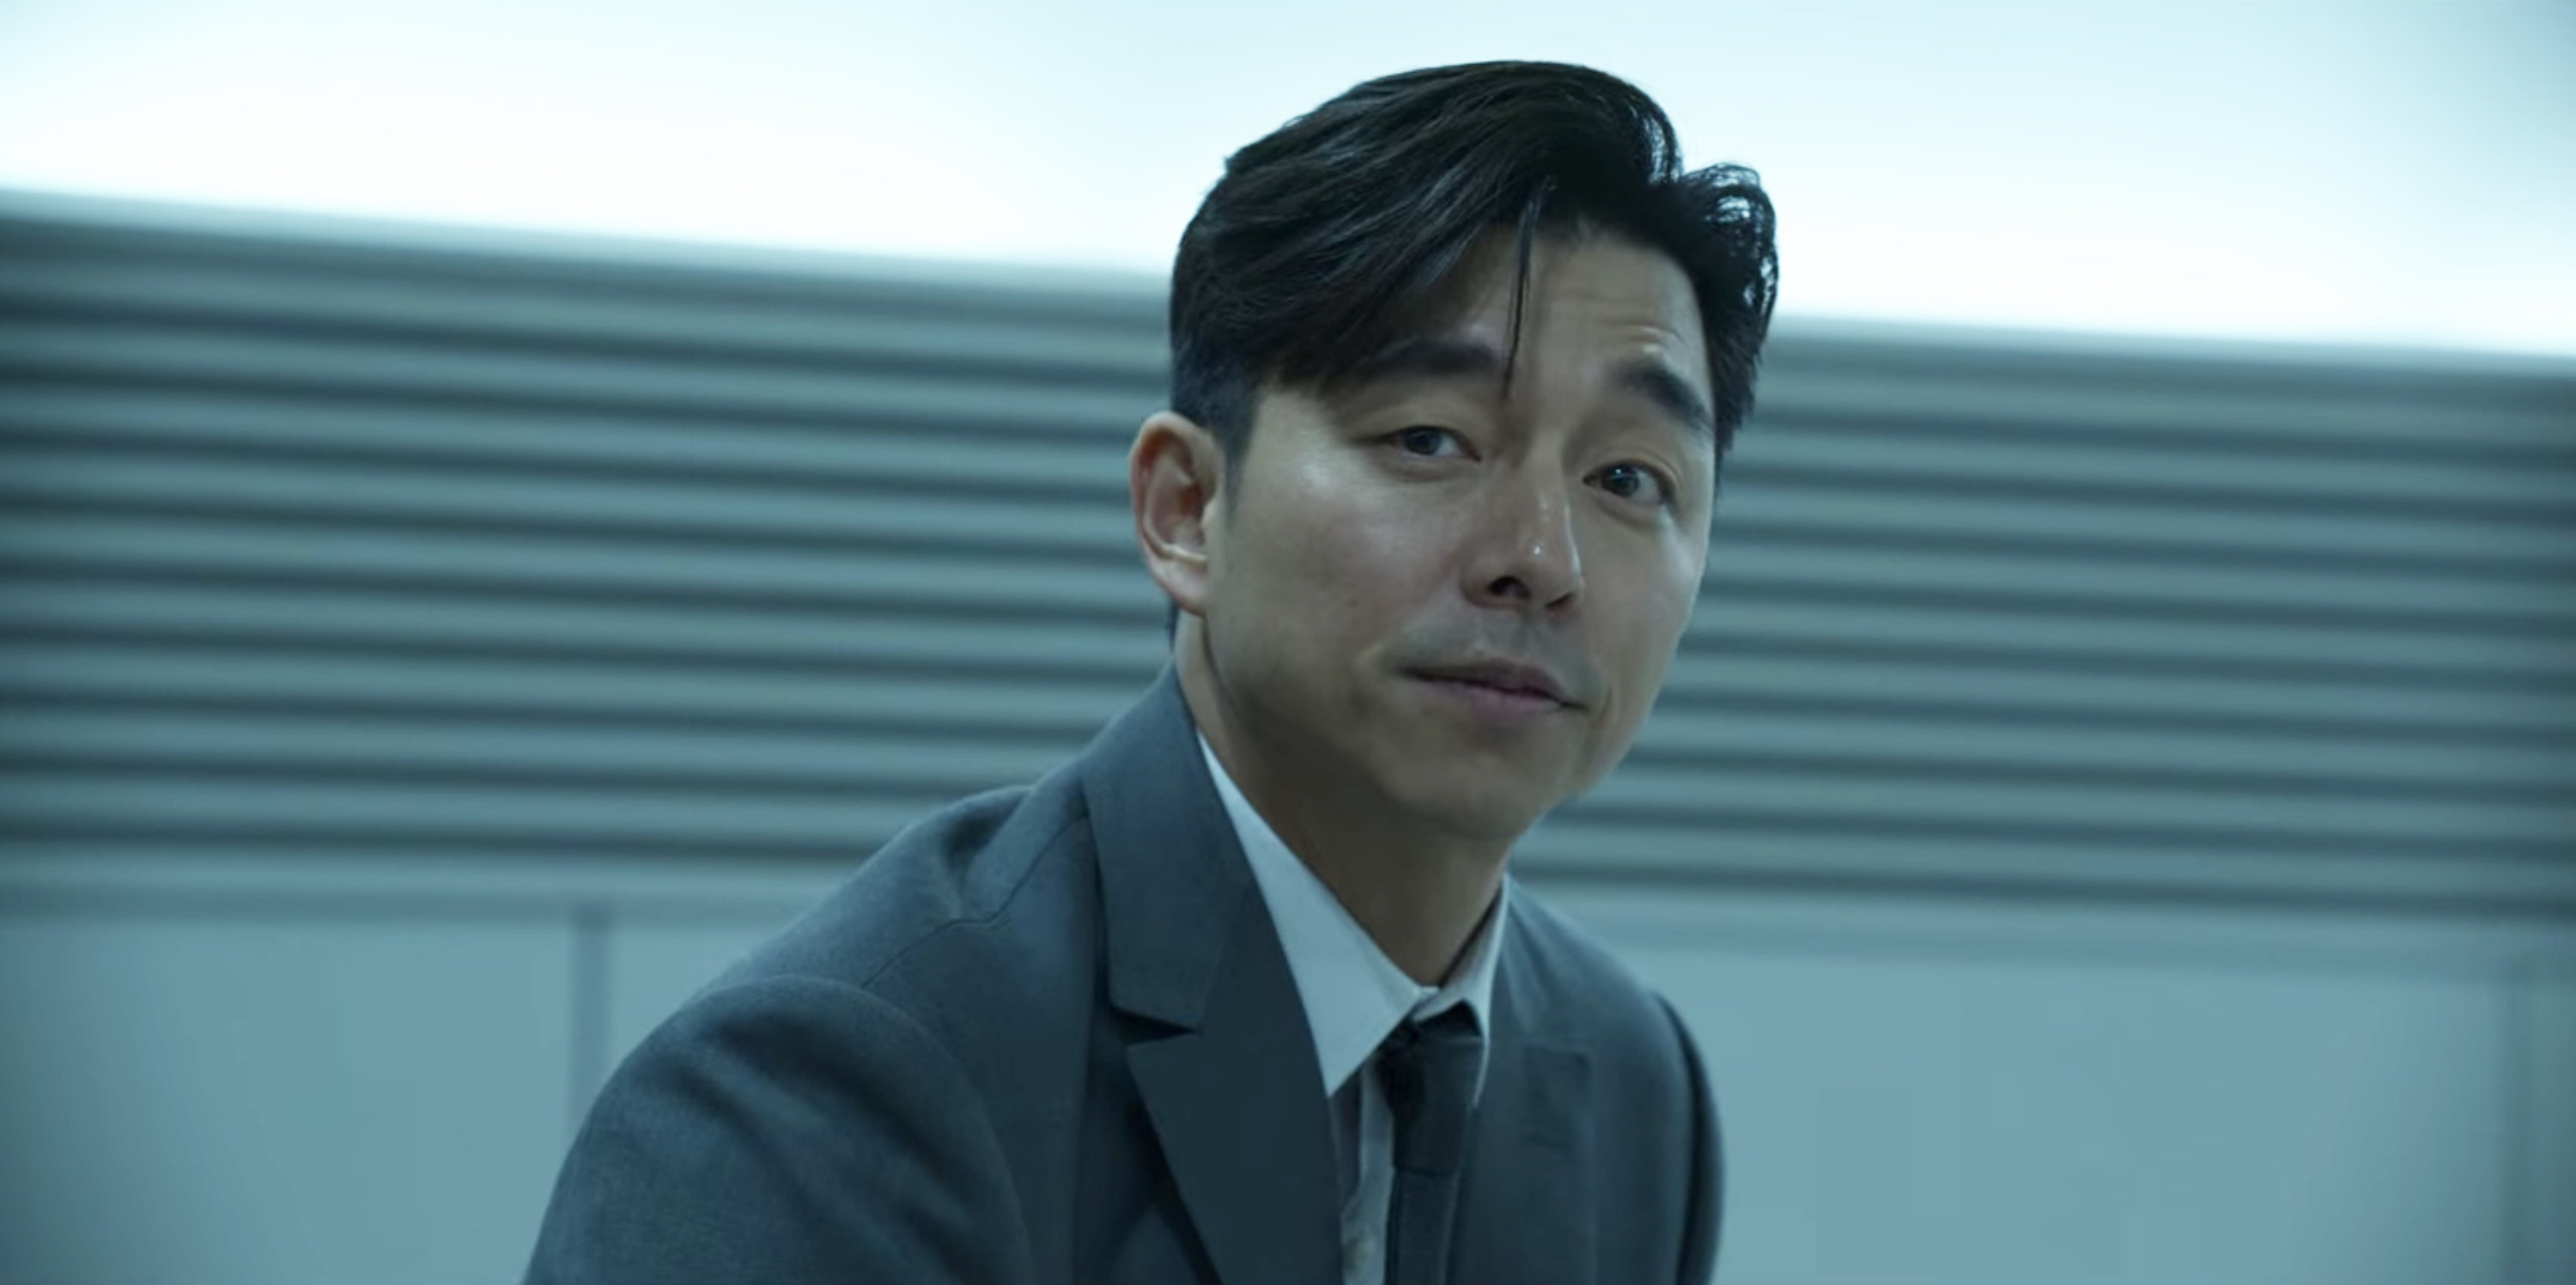 Who they played: Gong Yoo plays a salesman